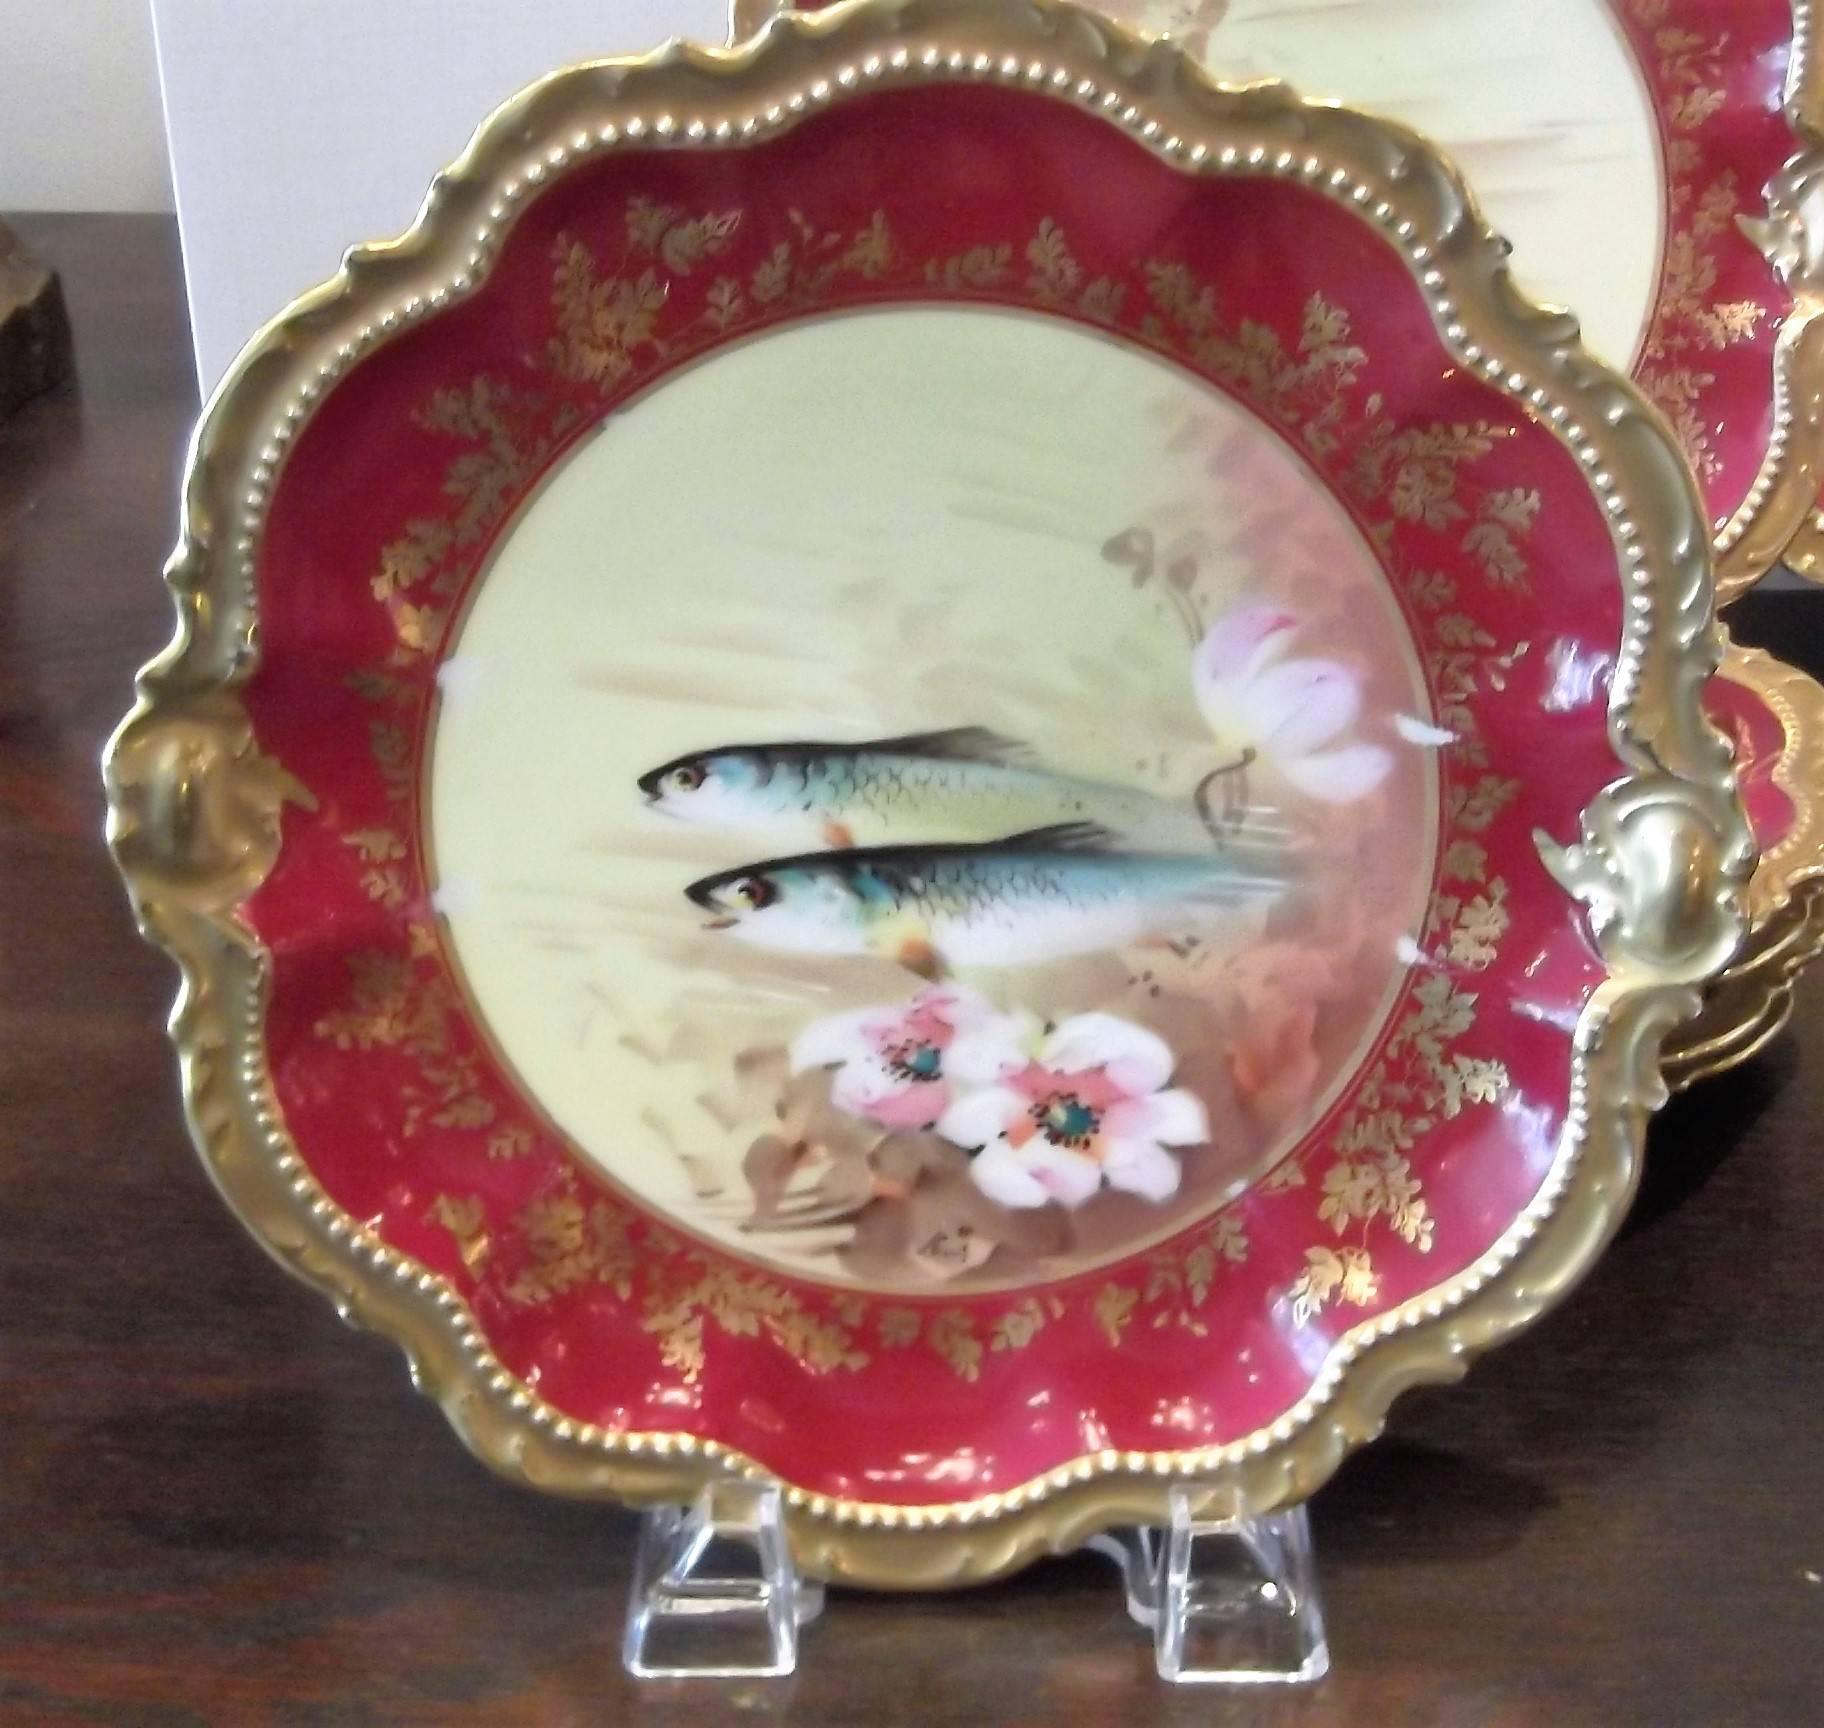 Porcelain 19th Century French Hand-Painted Fish Service